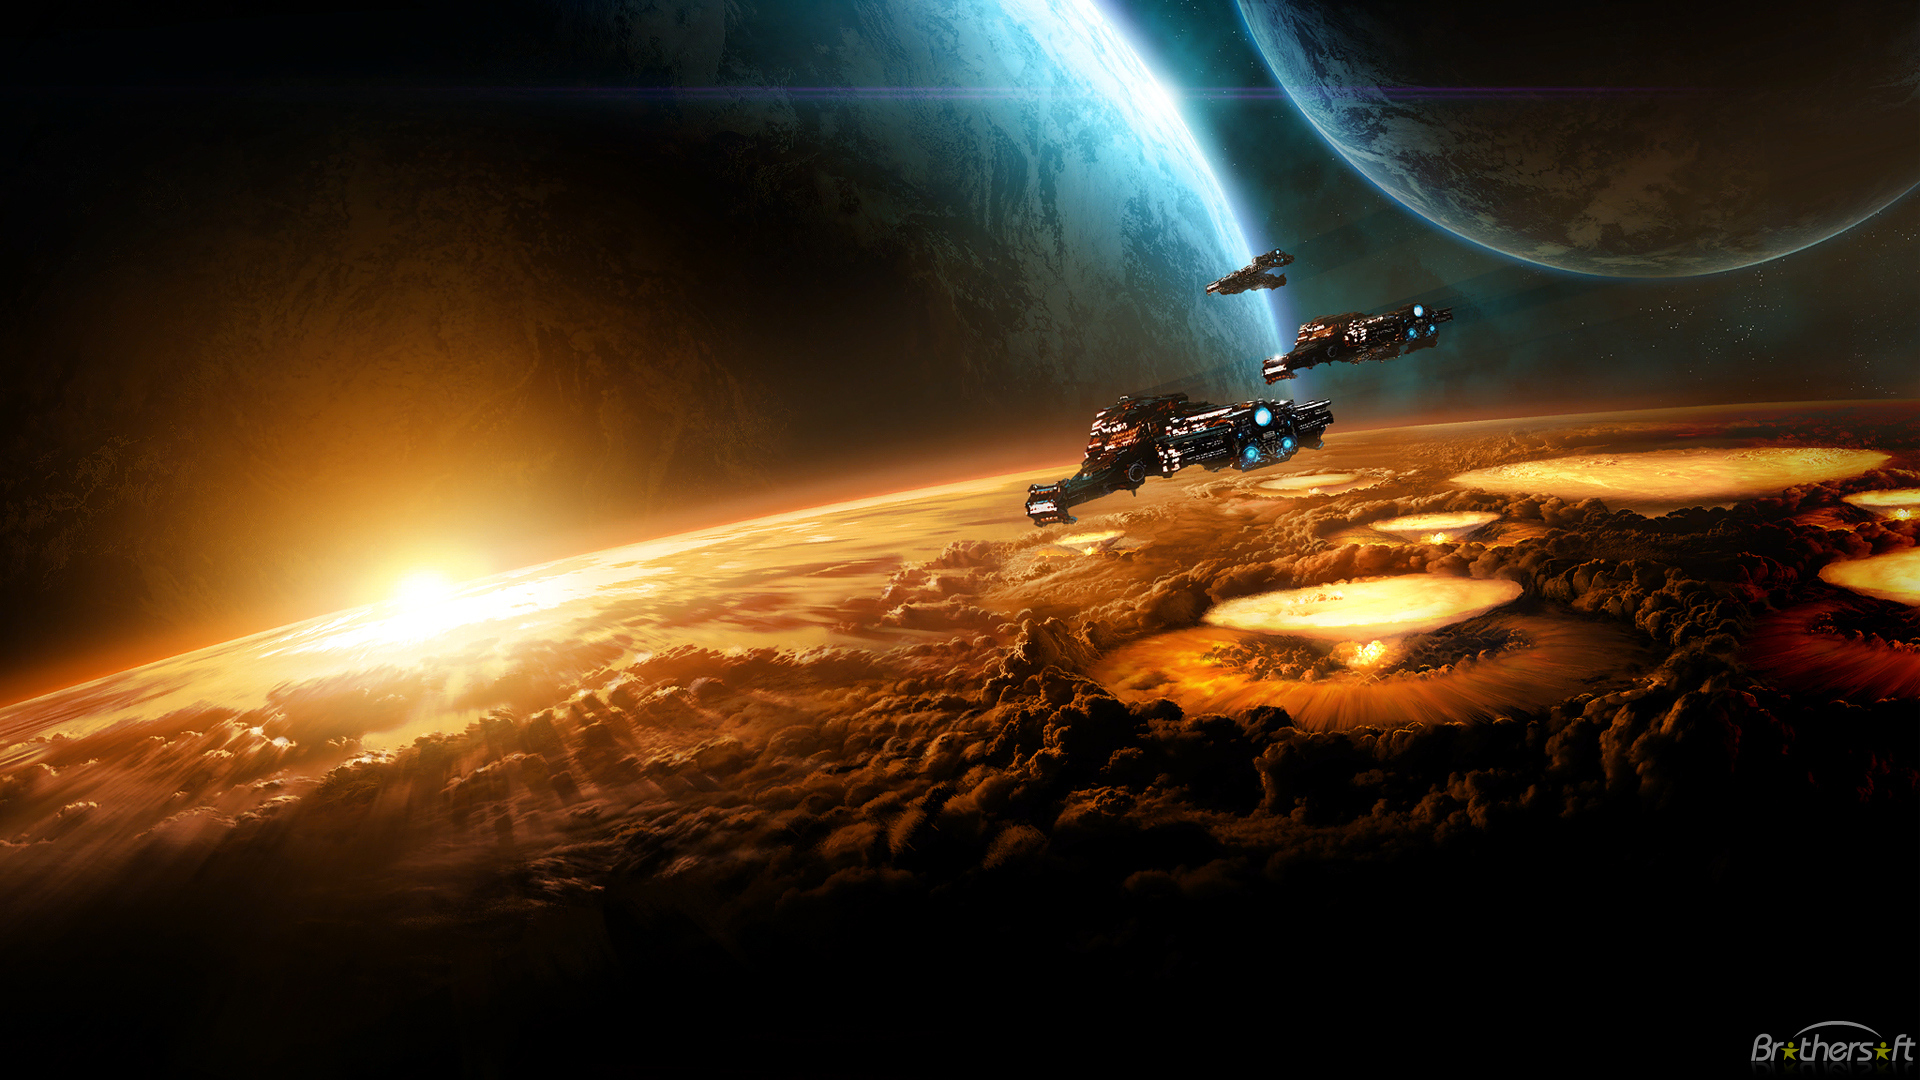 sun, Outer, Space, Planets, Spaceships, Vehicles, Starcraft, Ii Wallpaper